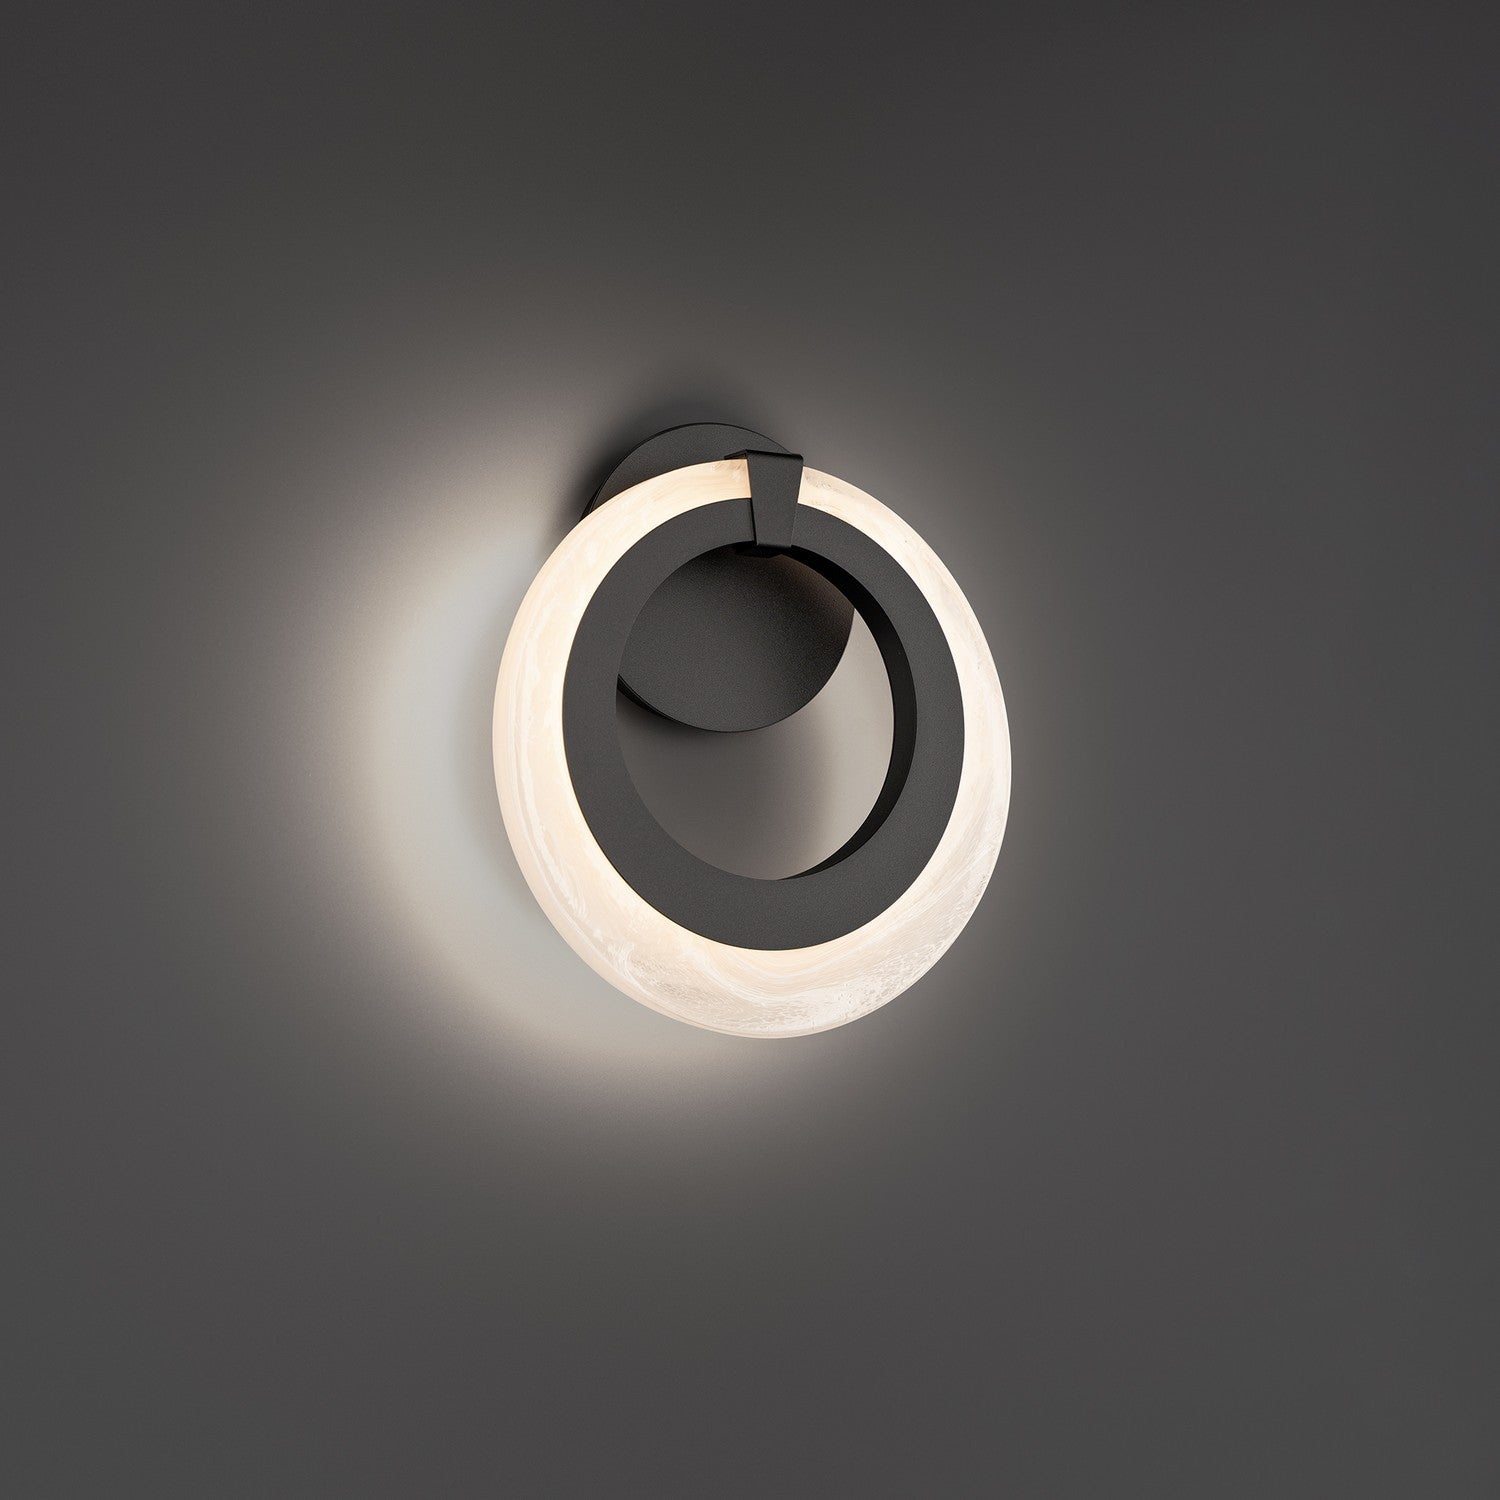 Modern Forms Canada - WS-38211-BK - LED Wall Sconce - Serenity - Black